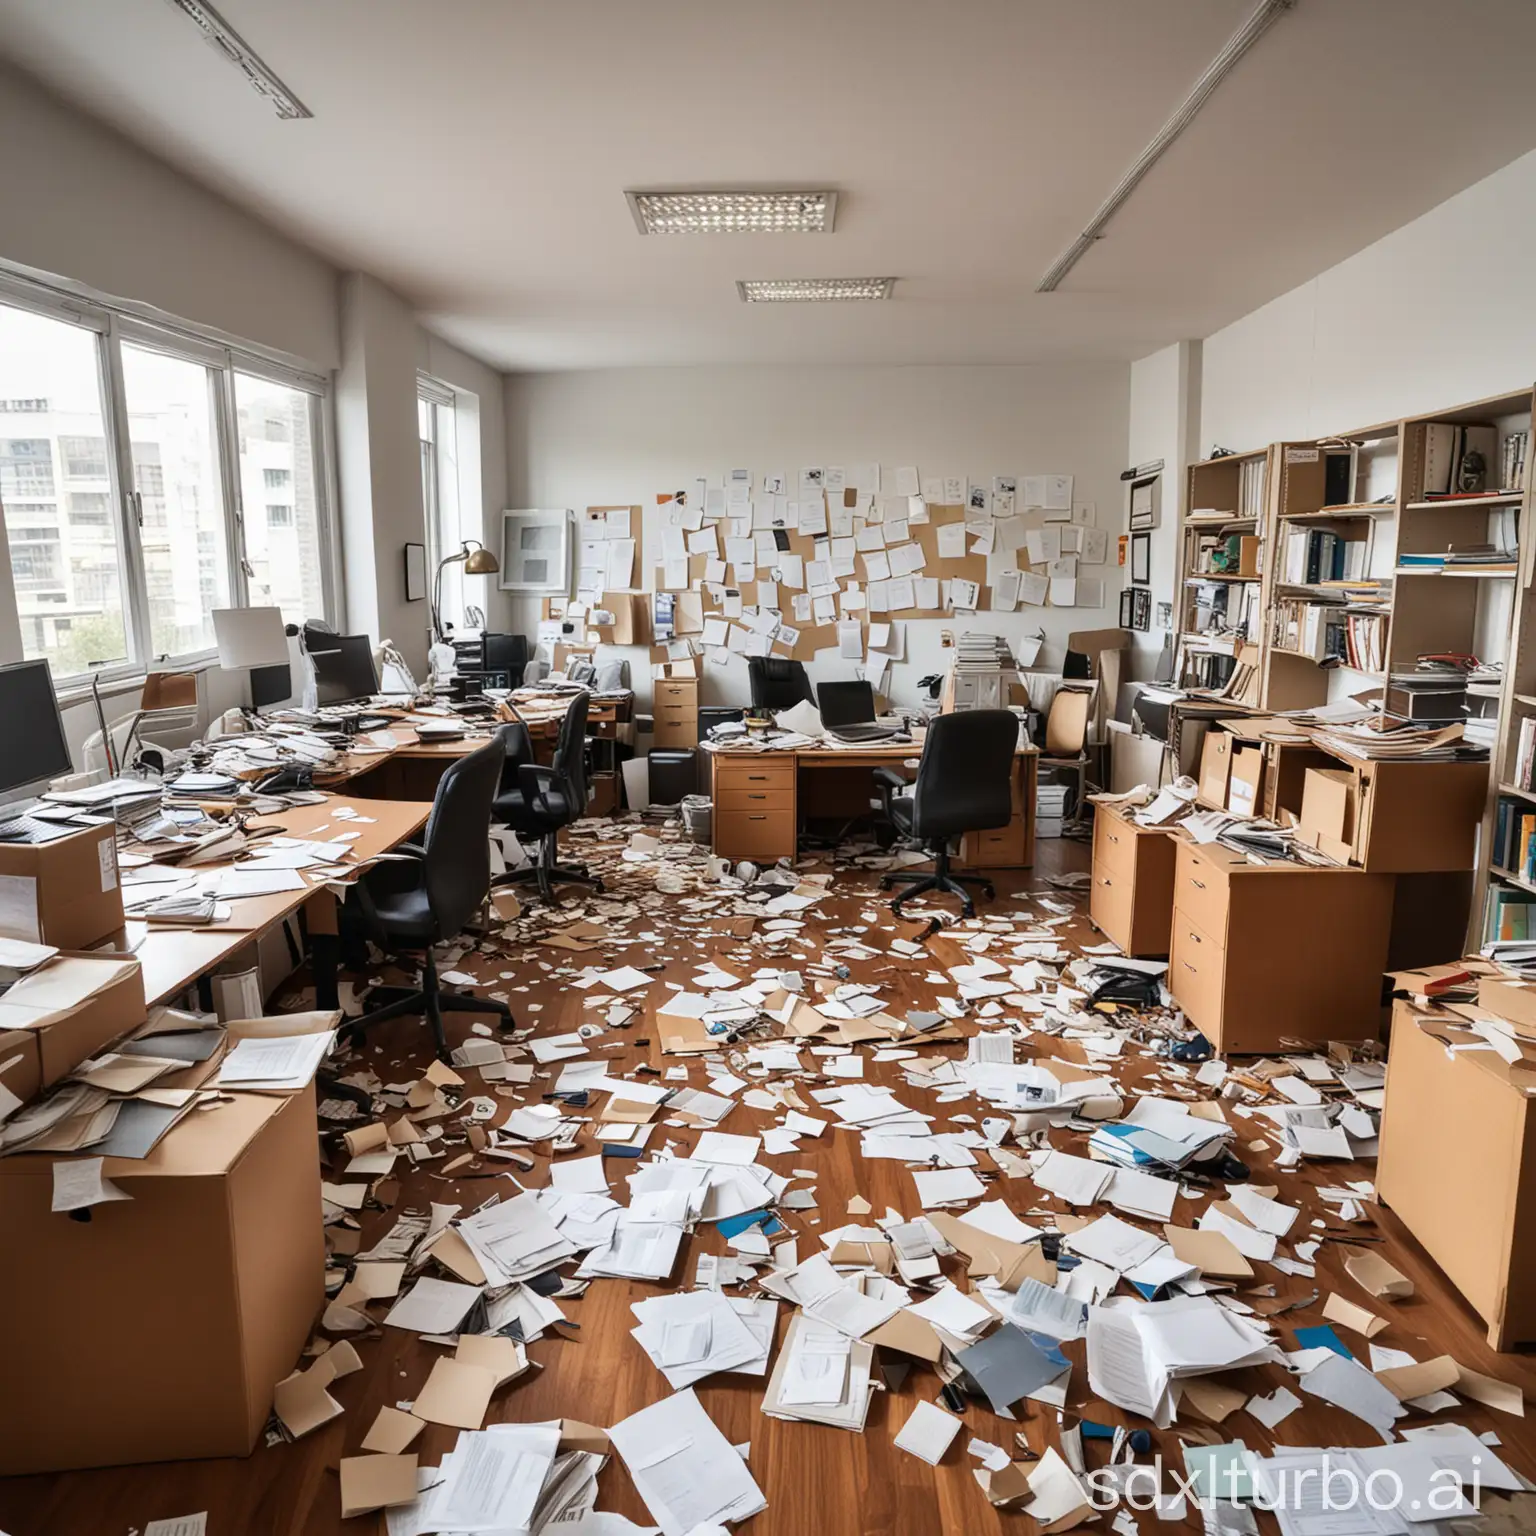 Chaos-in-a-Busy-Office-Environment-with-Scattered-Papers-and-Overwhelmed-Employees